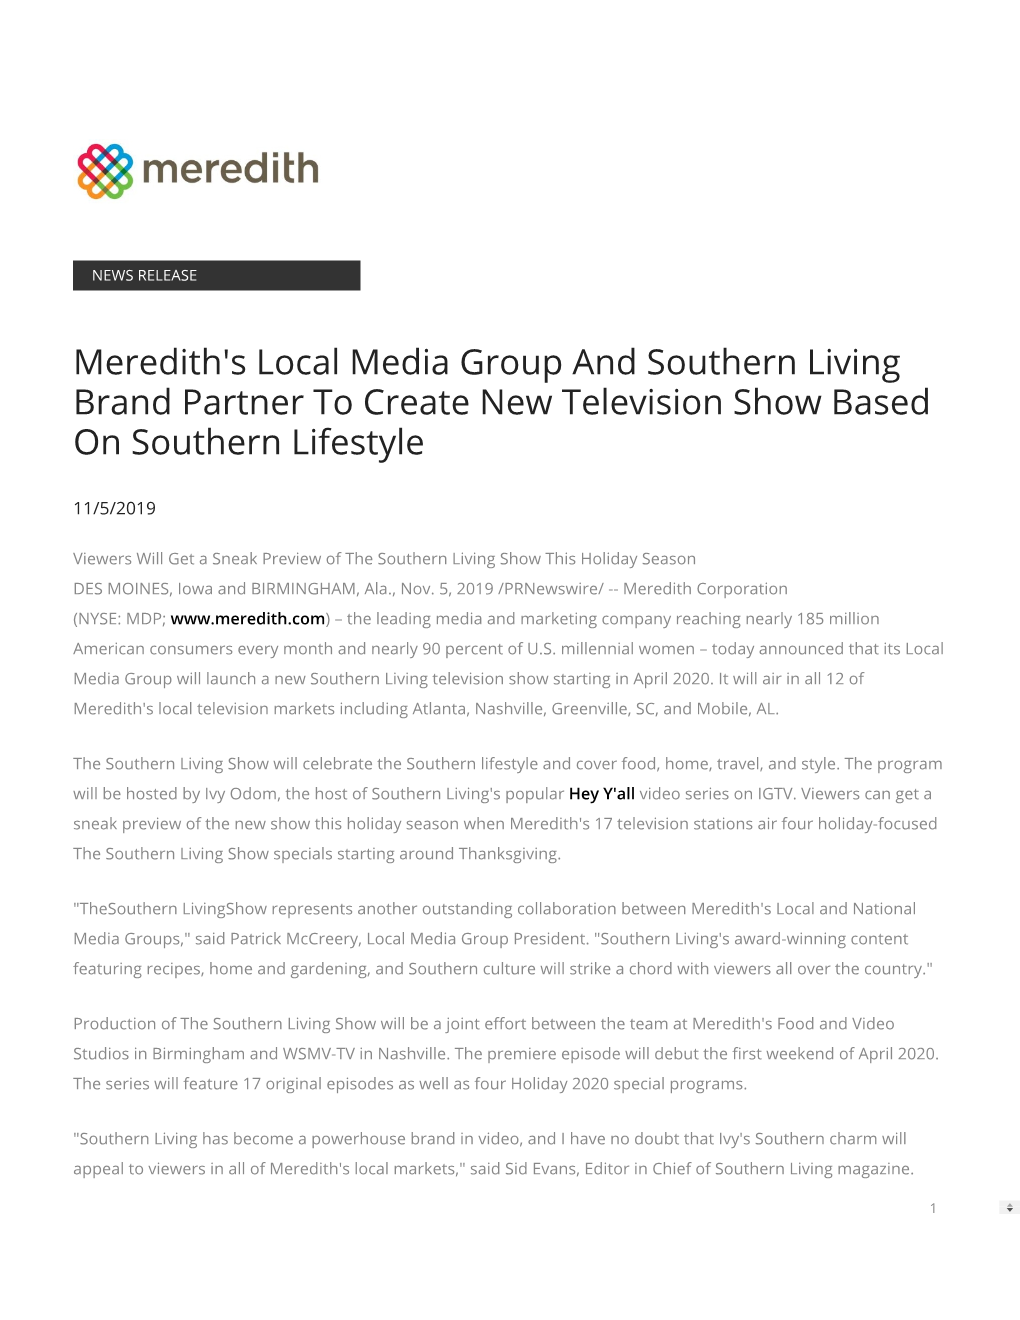 Meredith's Local Media Group and Southern Living Brand Partner to Create New Television Show Based on Southern Lifestyle